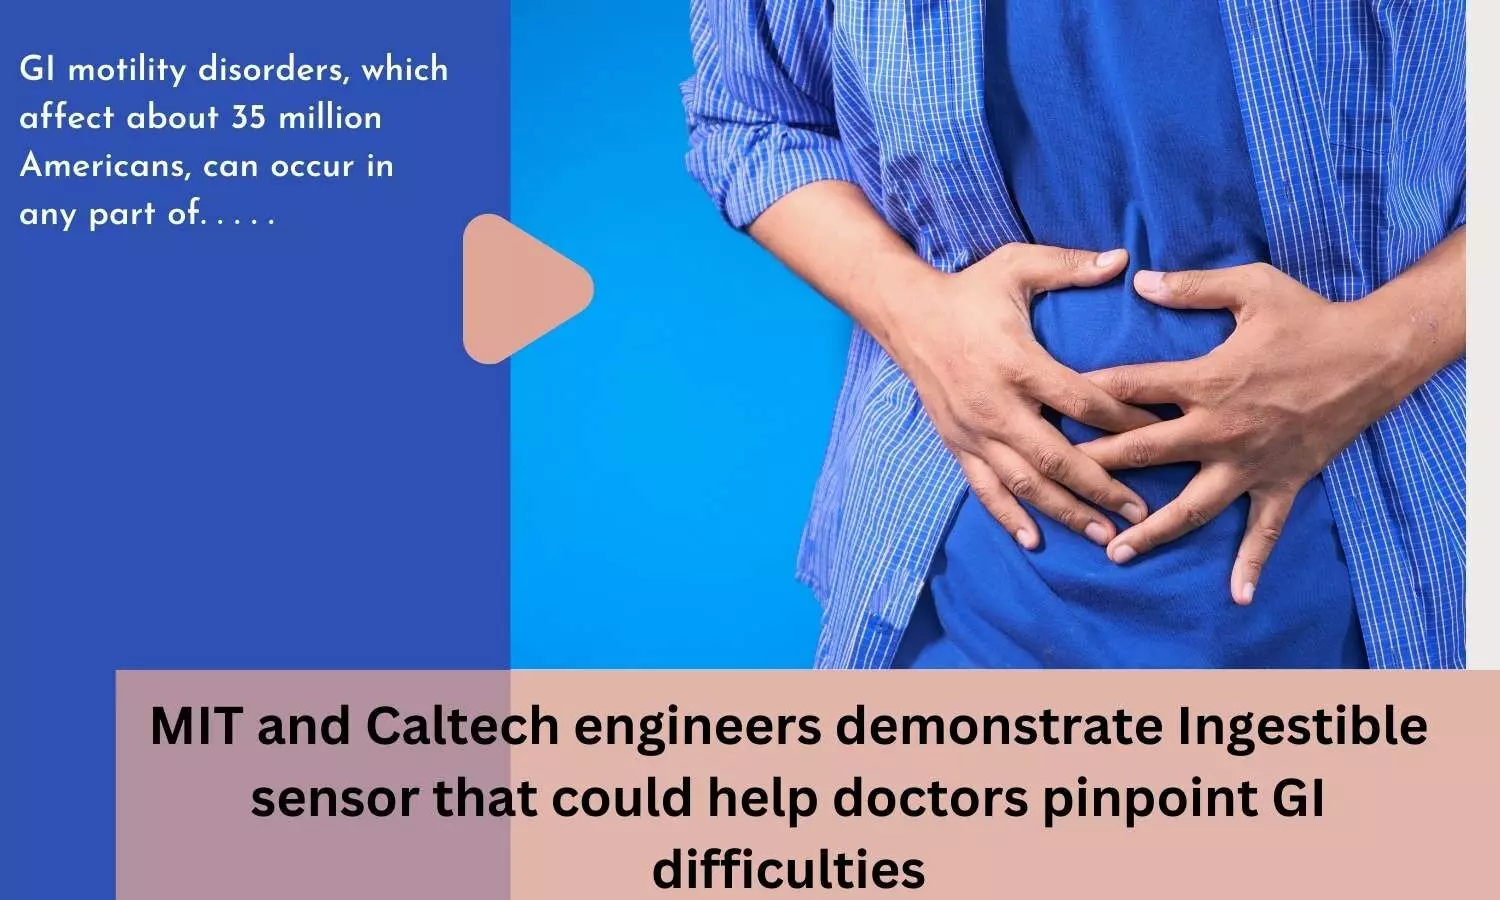 MIT and Caltech engineers demonstrate Ingestible sensor that could help doctors pinpoint GI difficulties